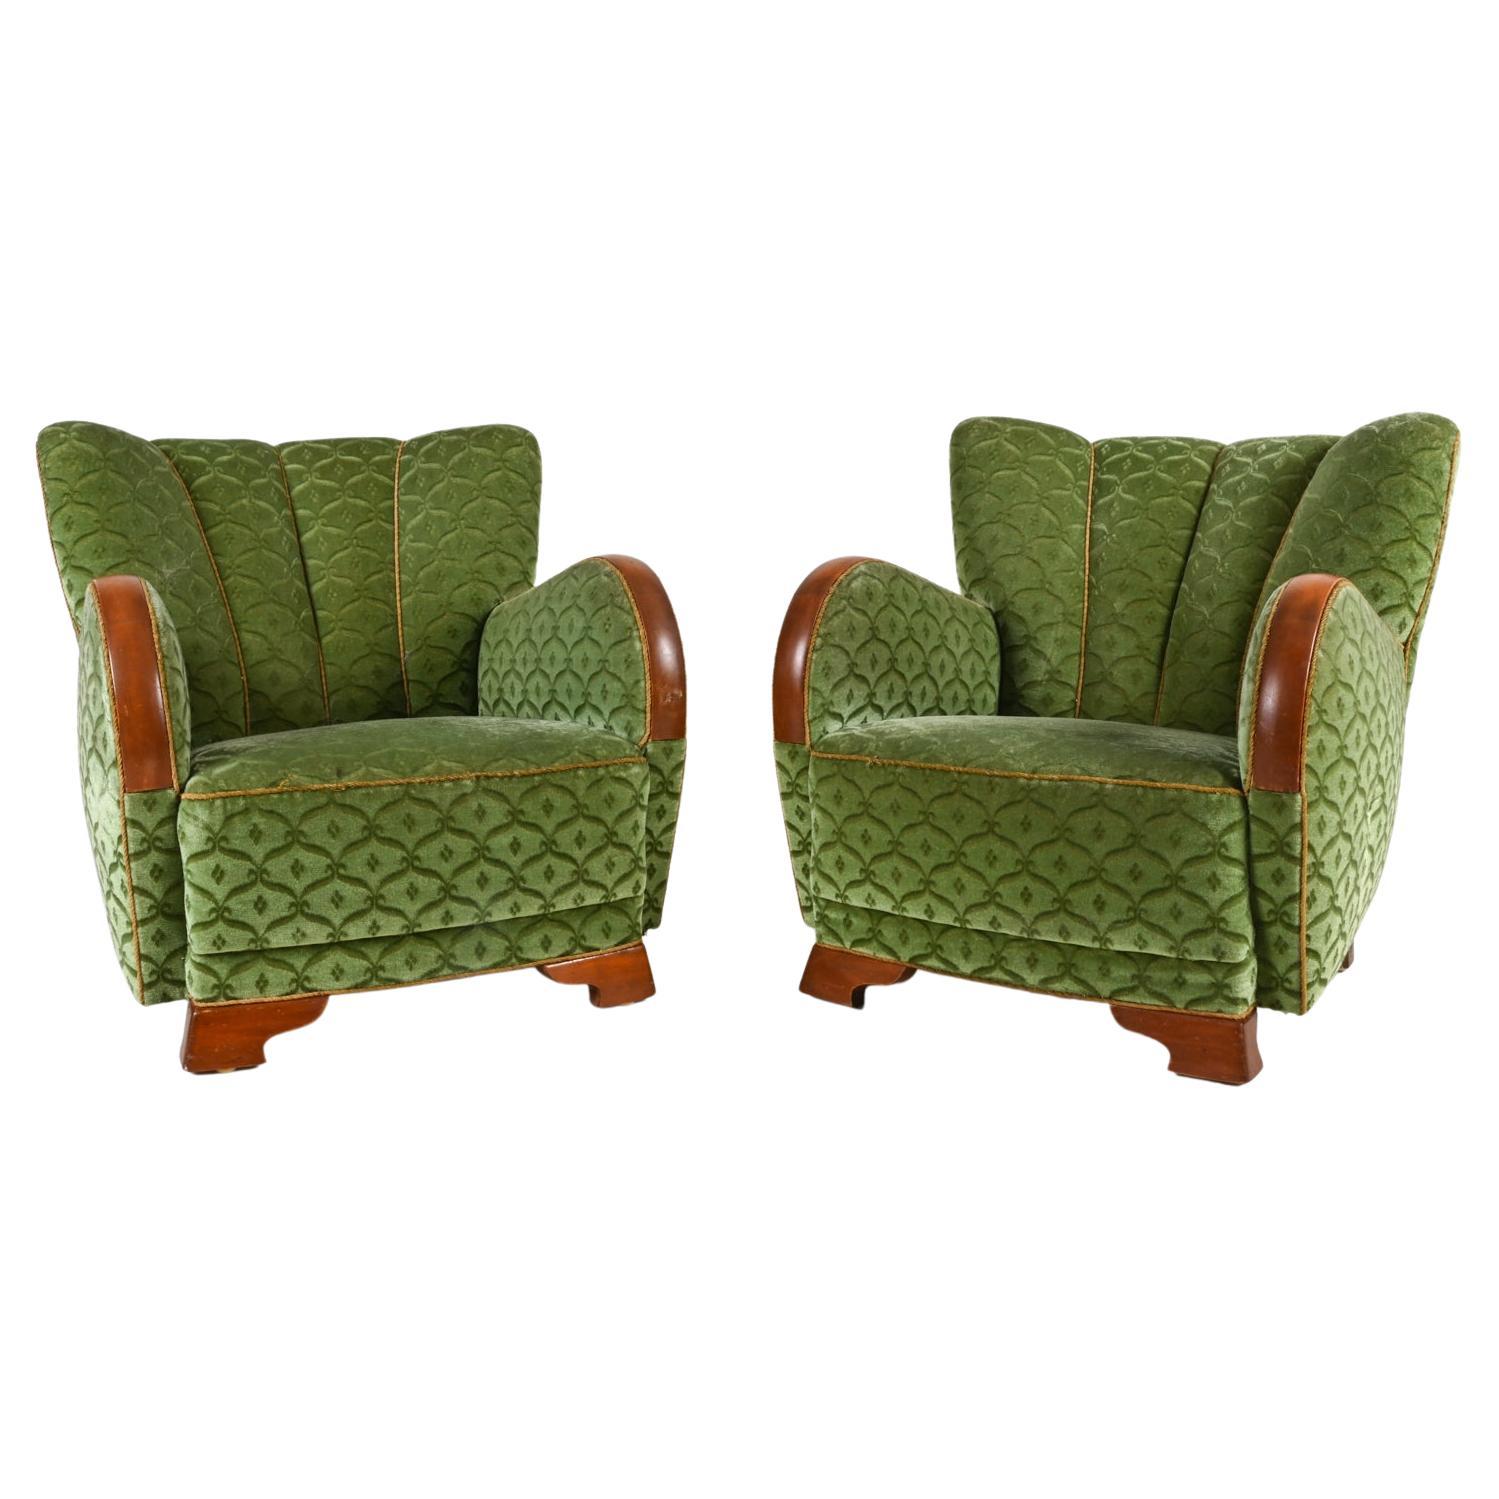 Pair of Mogens Lassen Style Danish Midcentury Lounge or Club Chairs, 1940s For Sale